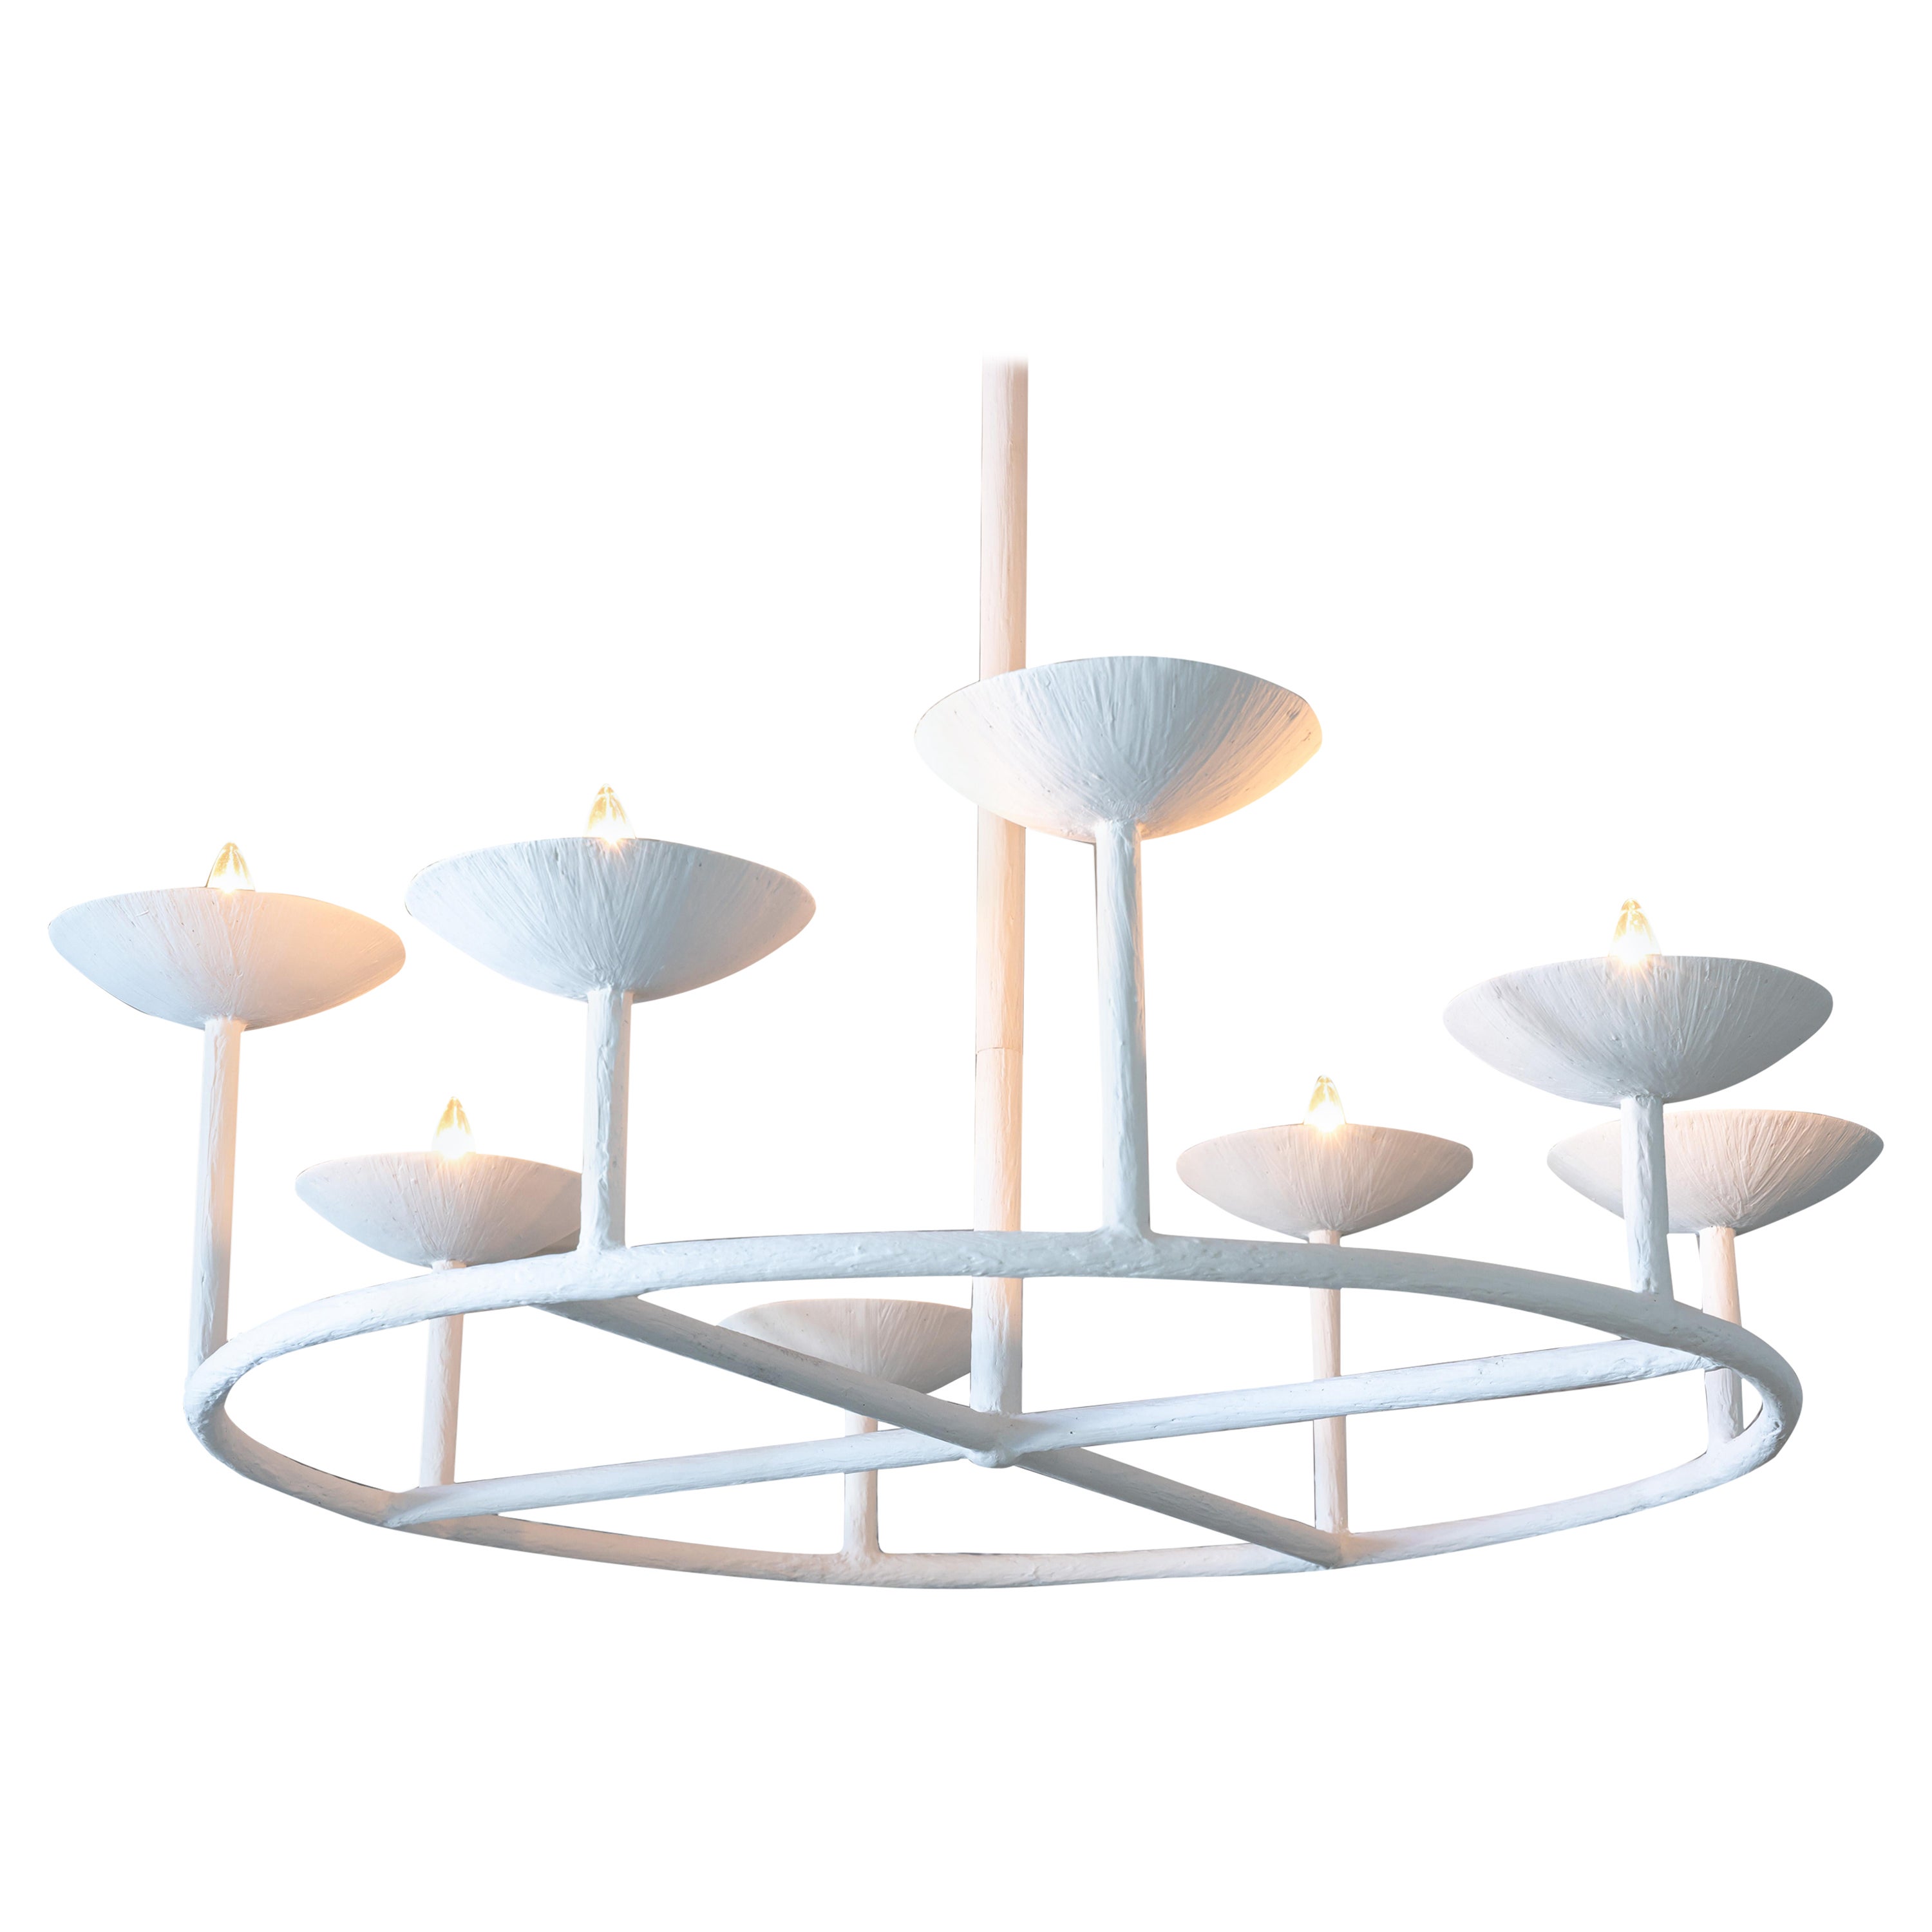 Circle of 8 Cups Plaster Chandelier